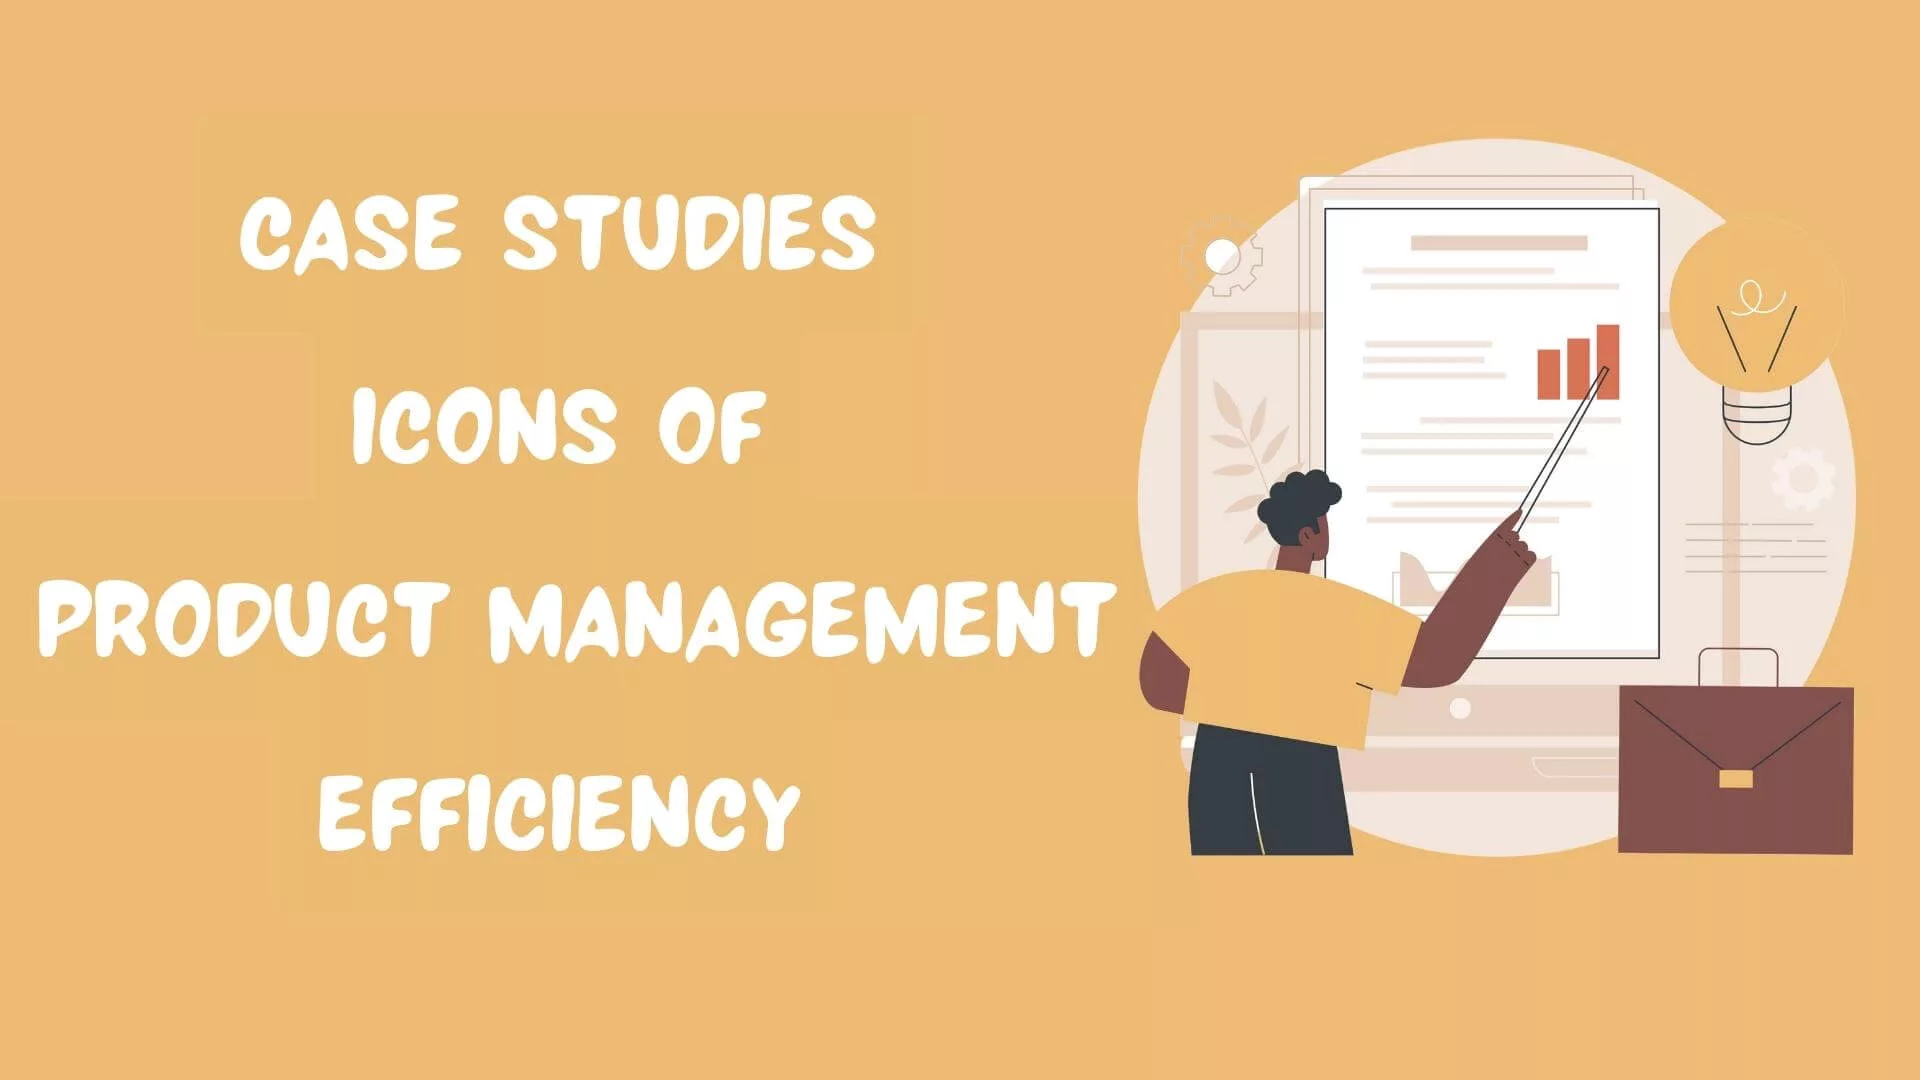 Case Studies: Icons of Product Management Efficiency